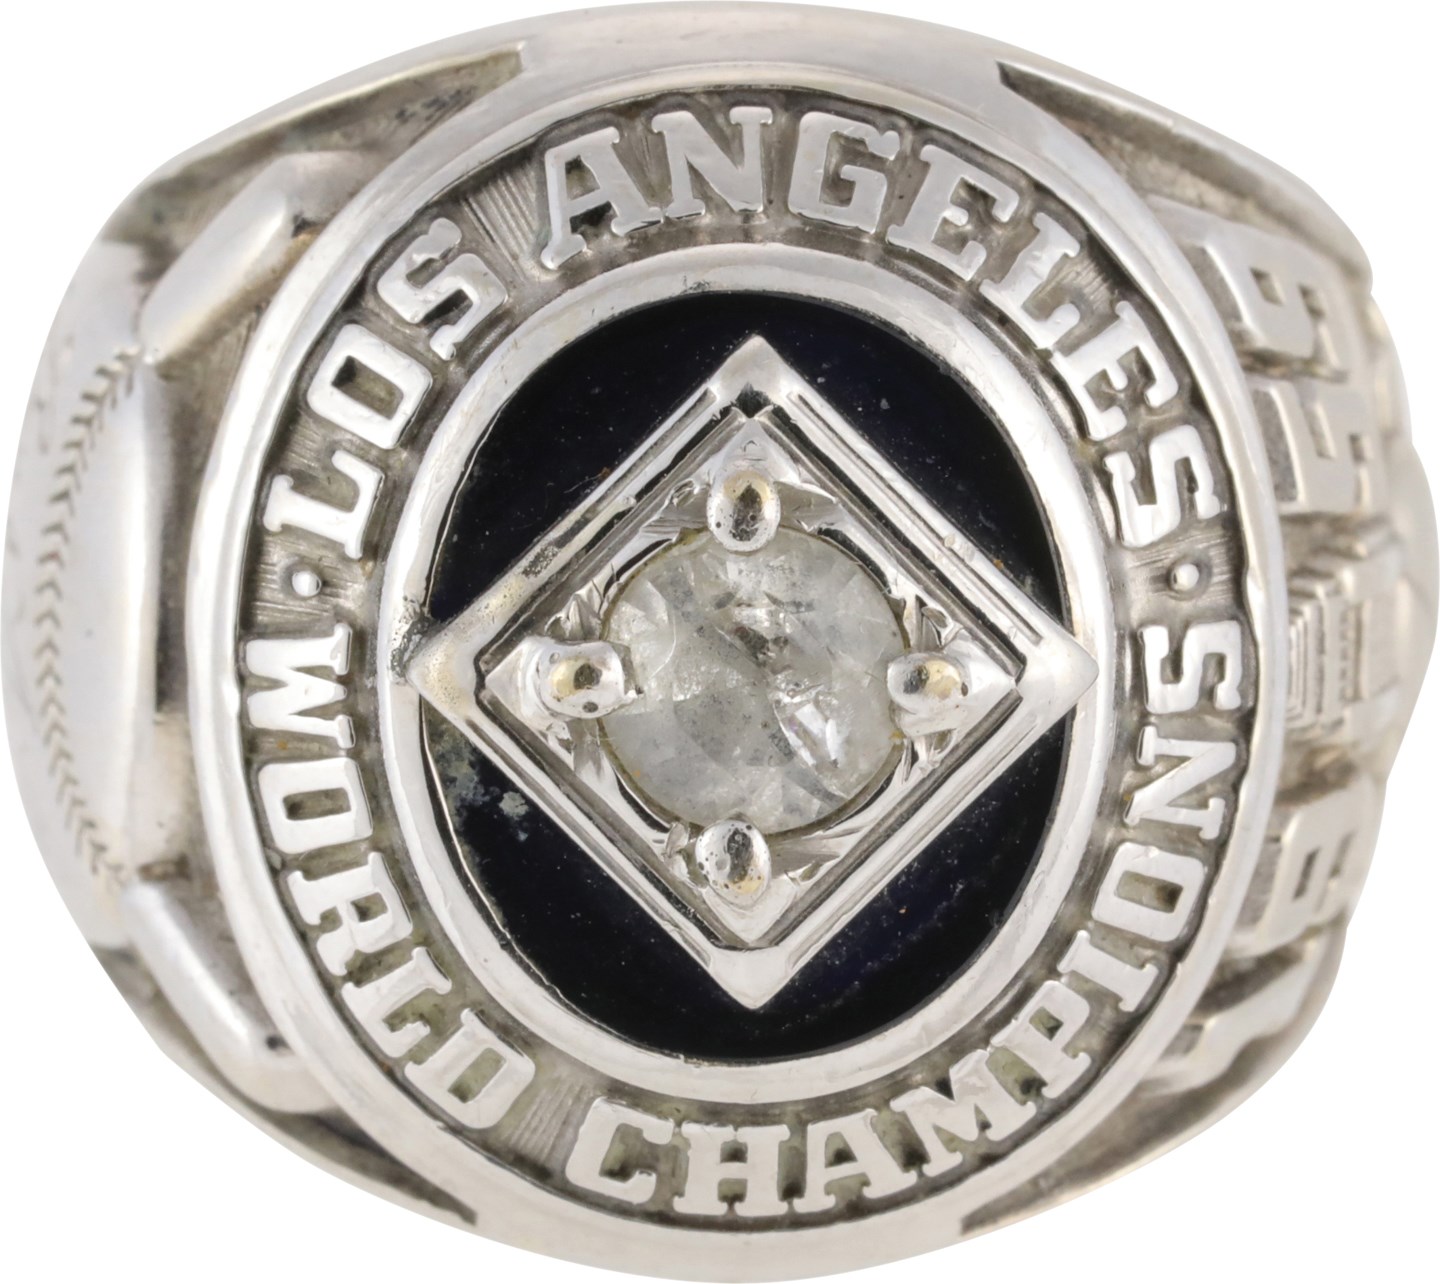 - 1959 Los Angeles Dodgers World Series Championship Scout Ring